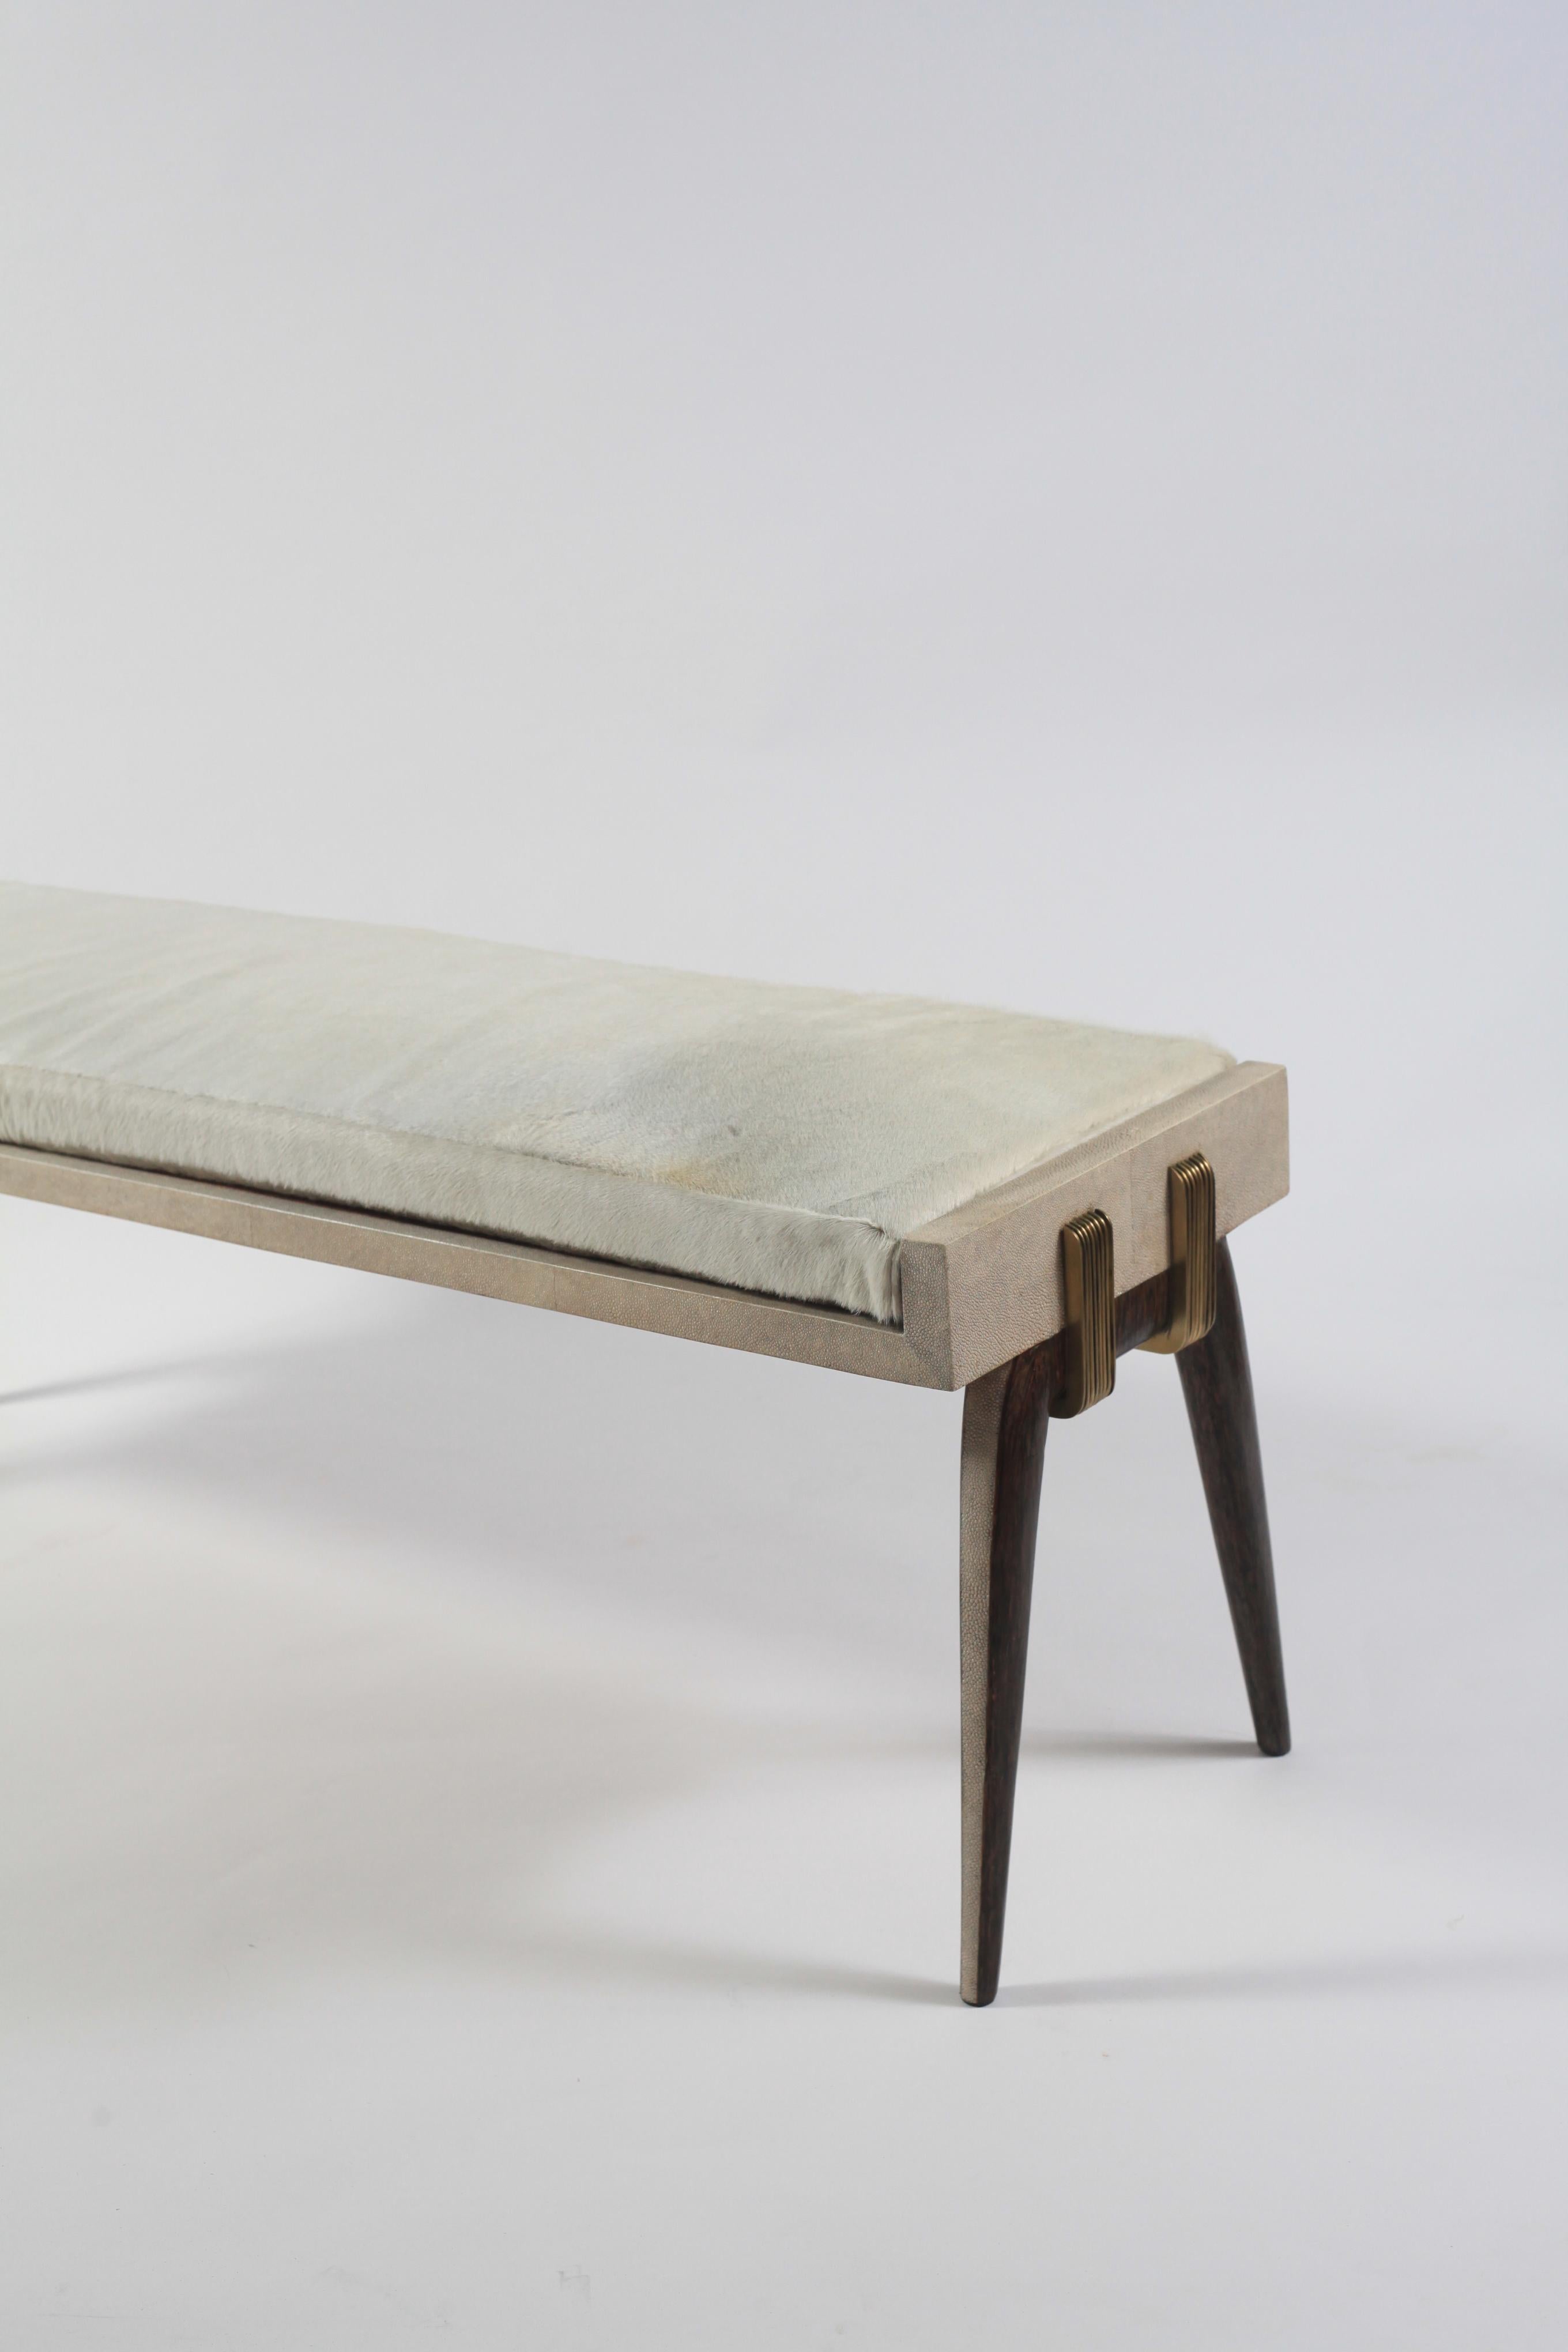 Hand-Crafted Tomboy Bench in Mink Shagreen and Fur Cover by R&Y Augousti For Sale